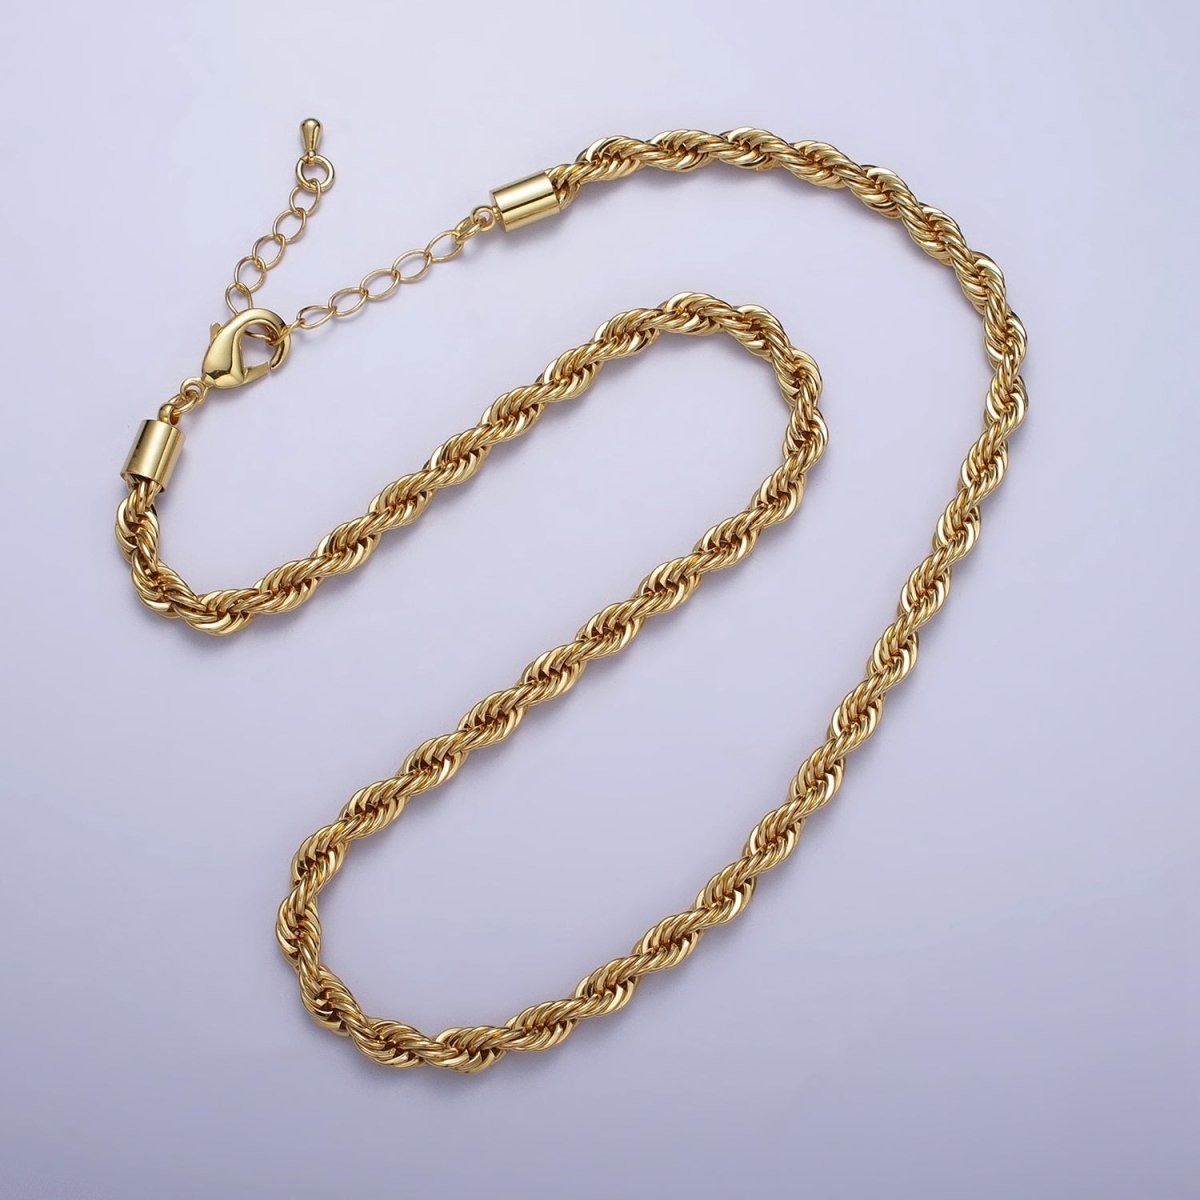 Bold Gold Rope necklace, Thick Chunky chain necklace 5mm Twist Necklace 17", 19.5 inch + 2 inch extender | WA-1532 WA-1533 WA-1534 WA-1535 Clearance Pricing - DLUXCA